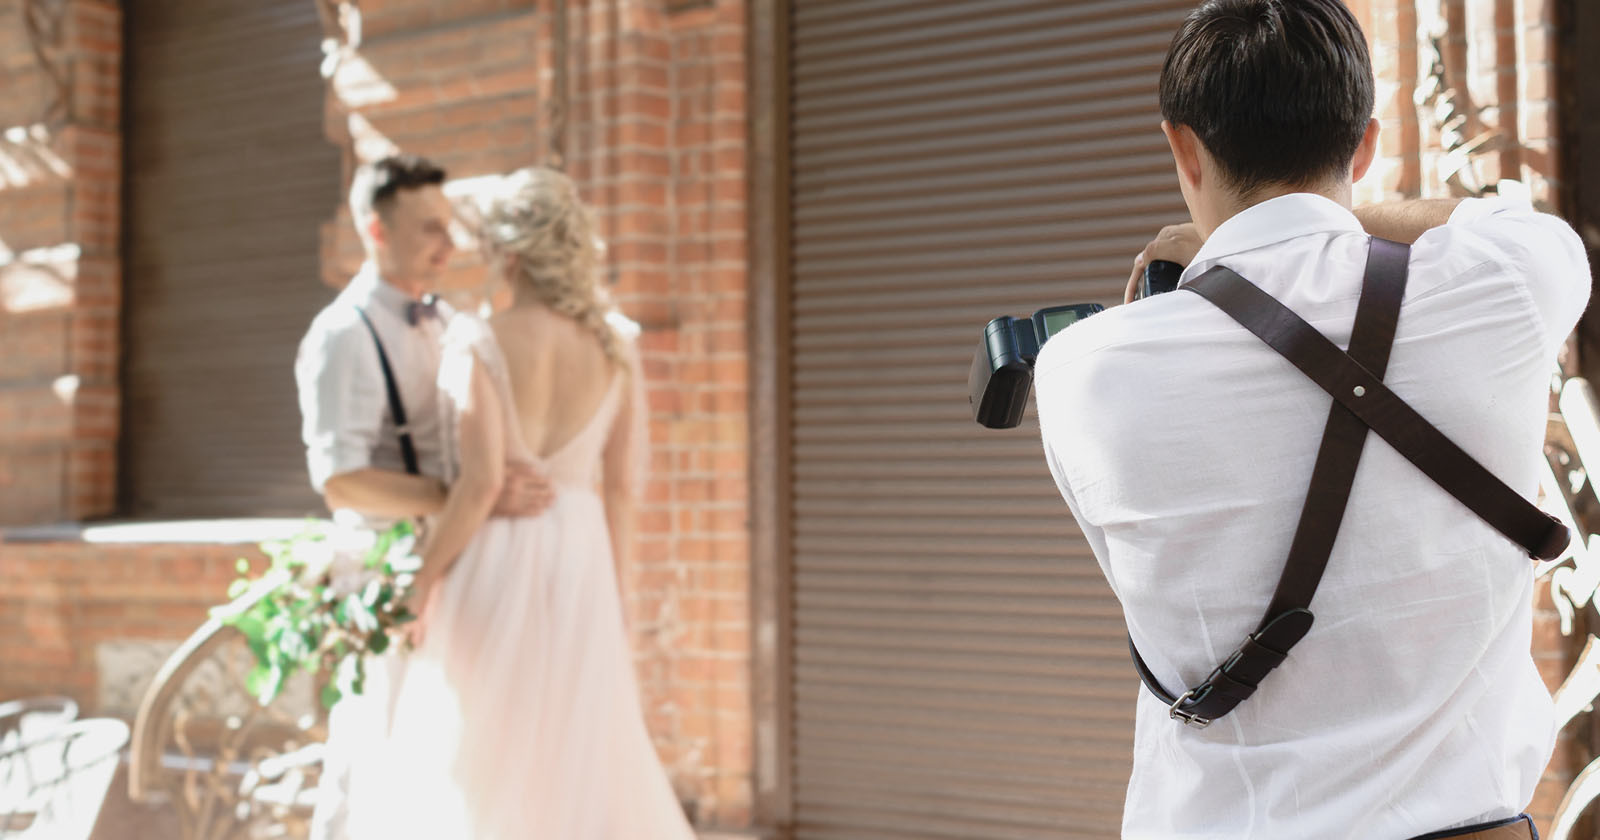 Wedding Photographer Divides Internet with Safety Shot Technique